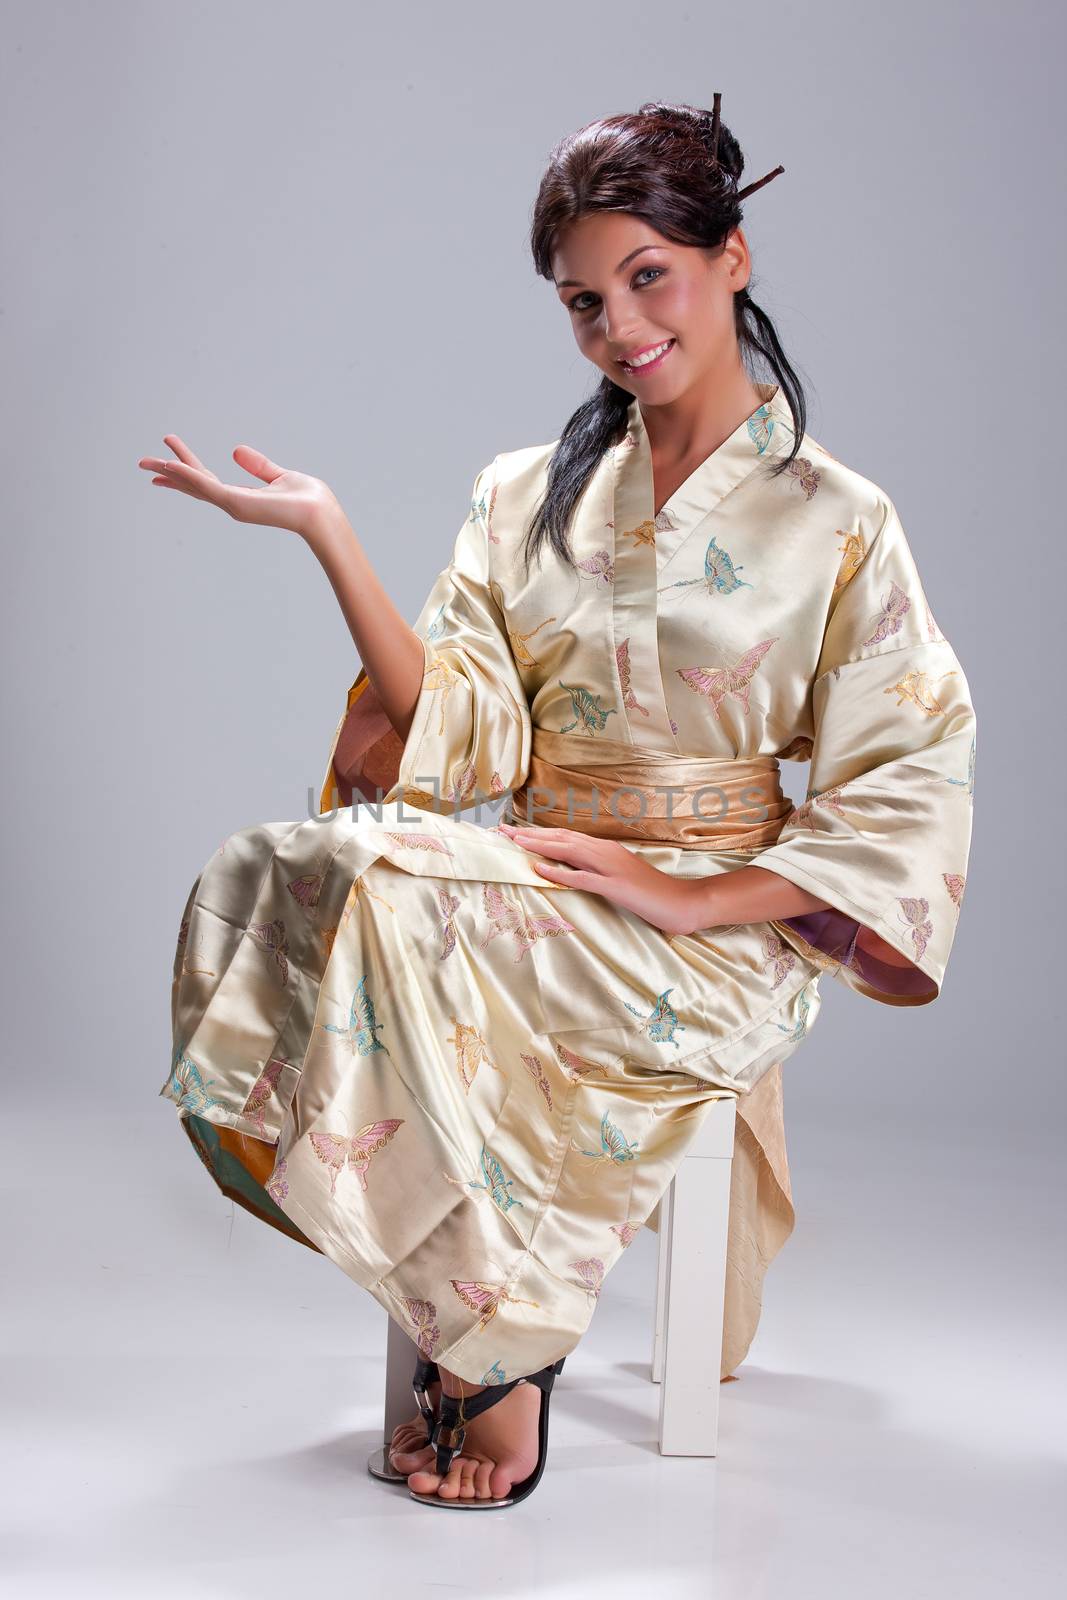 Young Beautiful Woman In Japanese National Clothing by Fotoskat